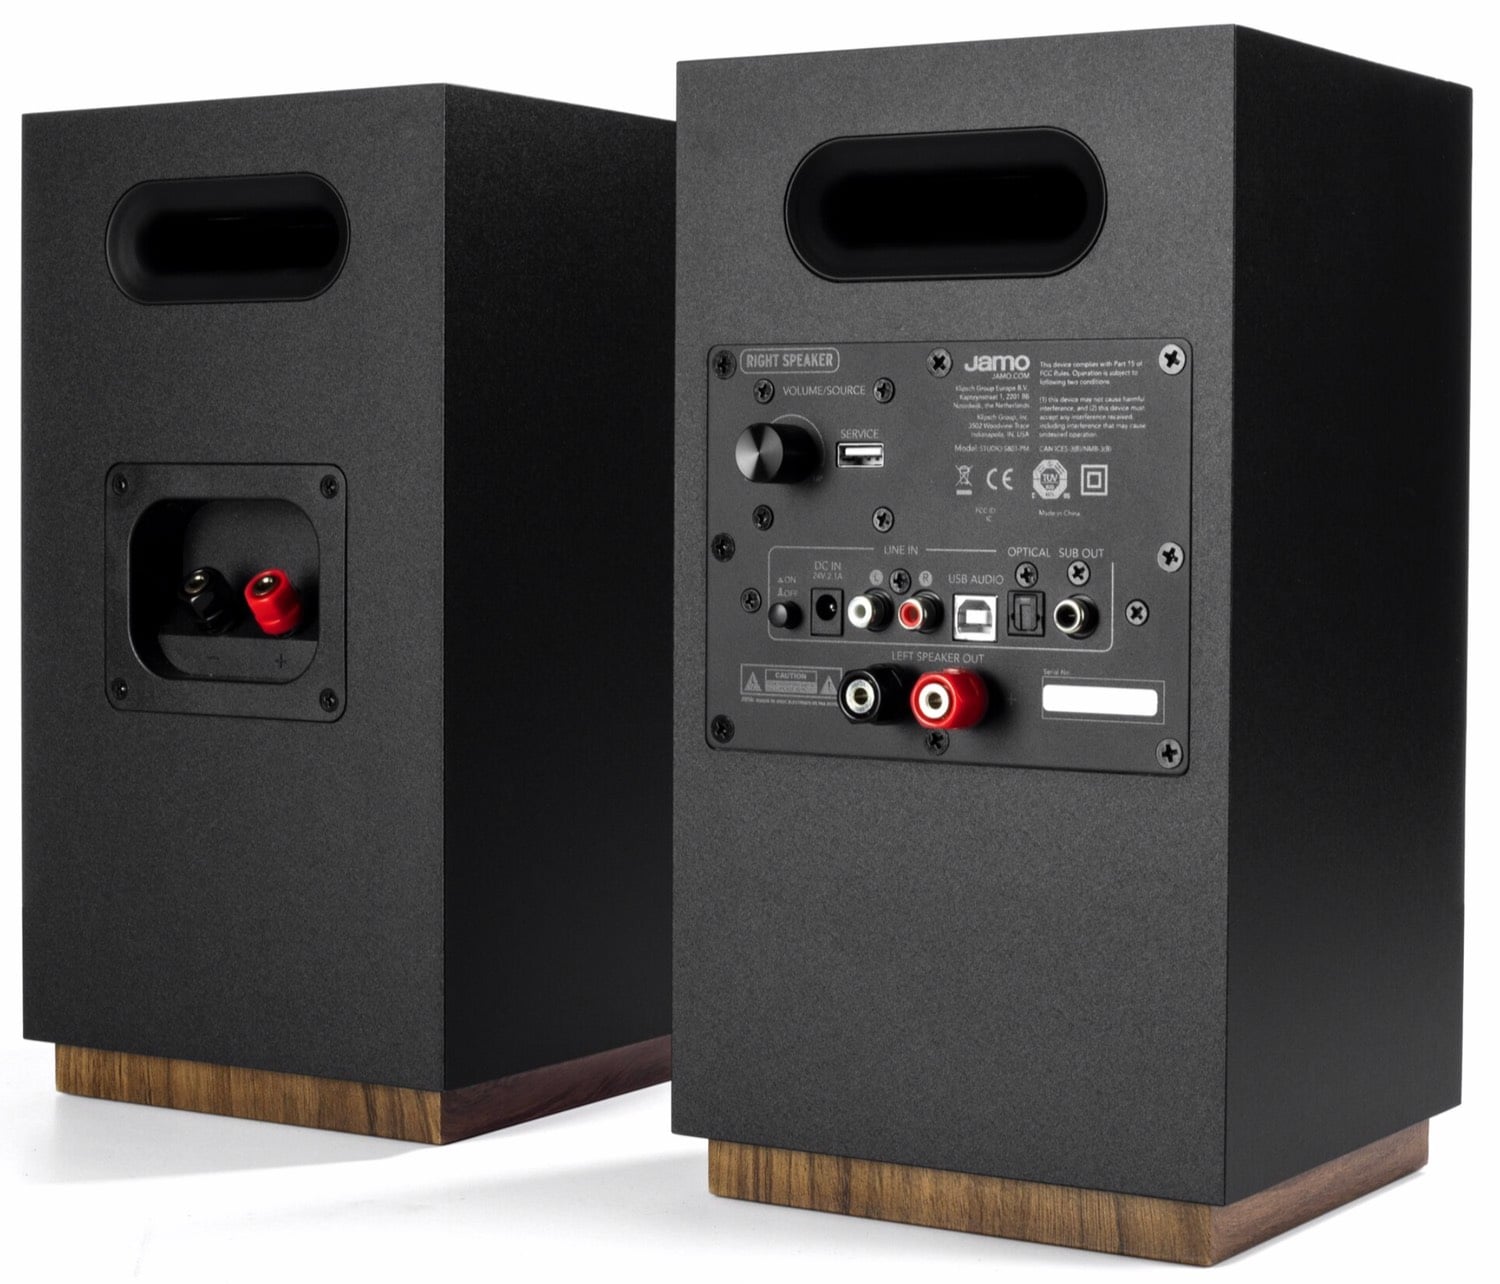 S801 PM Powered Speakers From Jamo